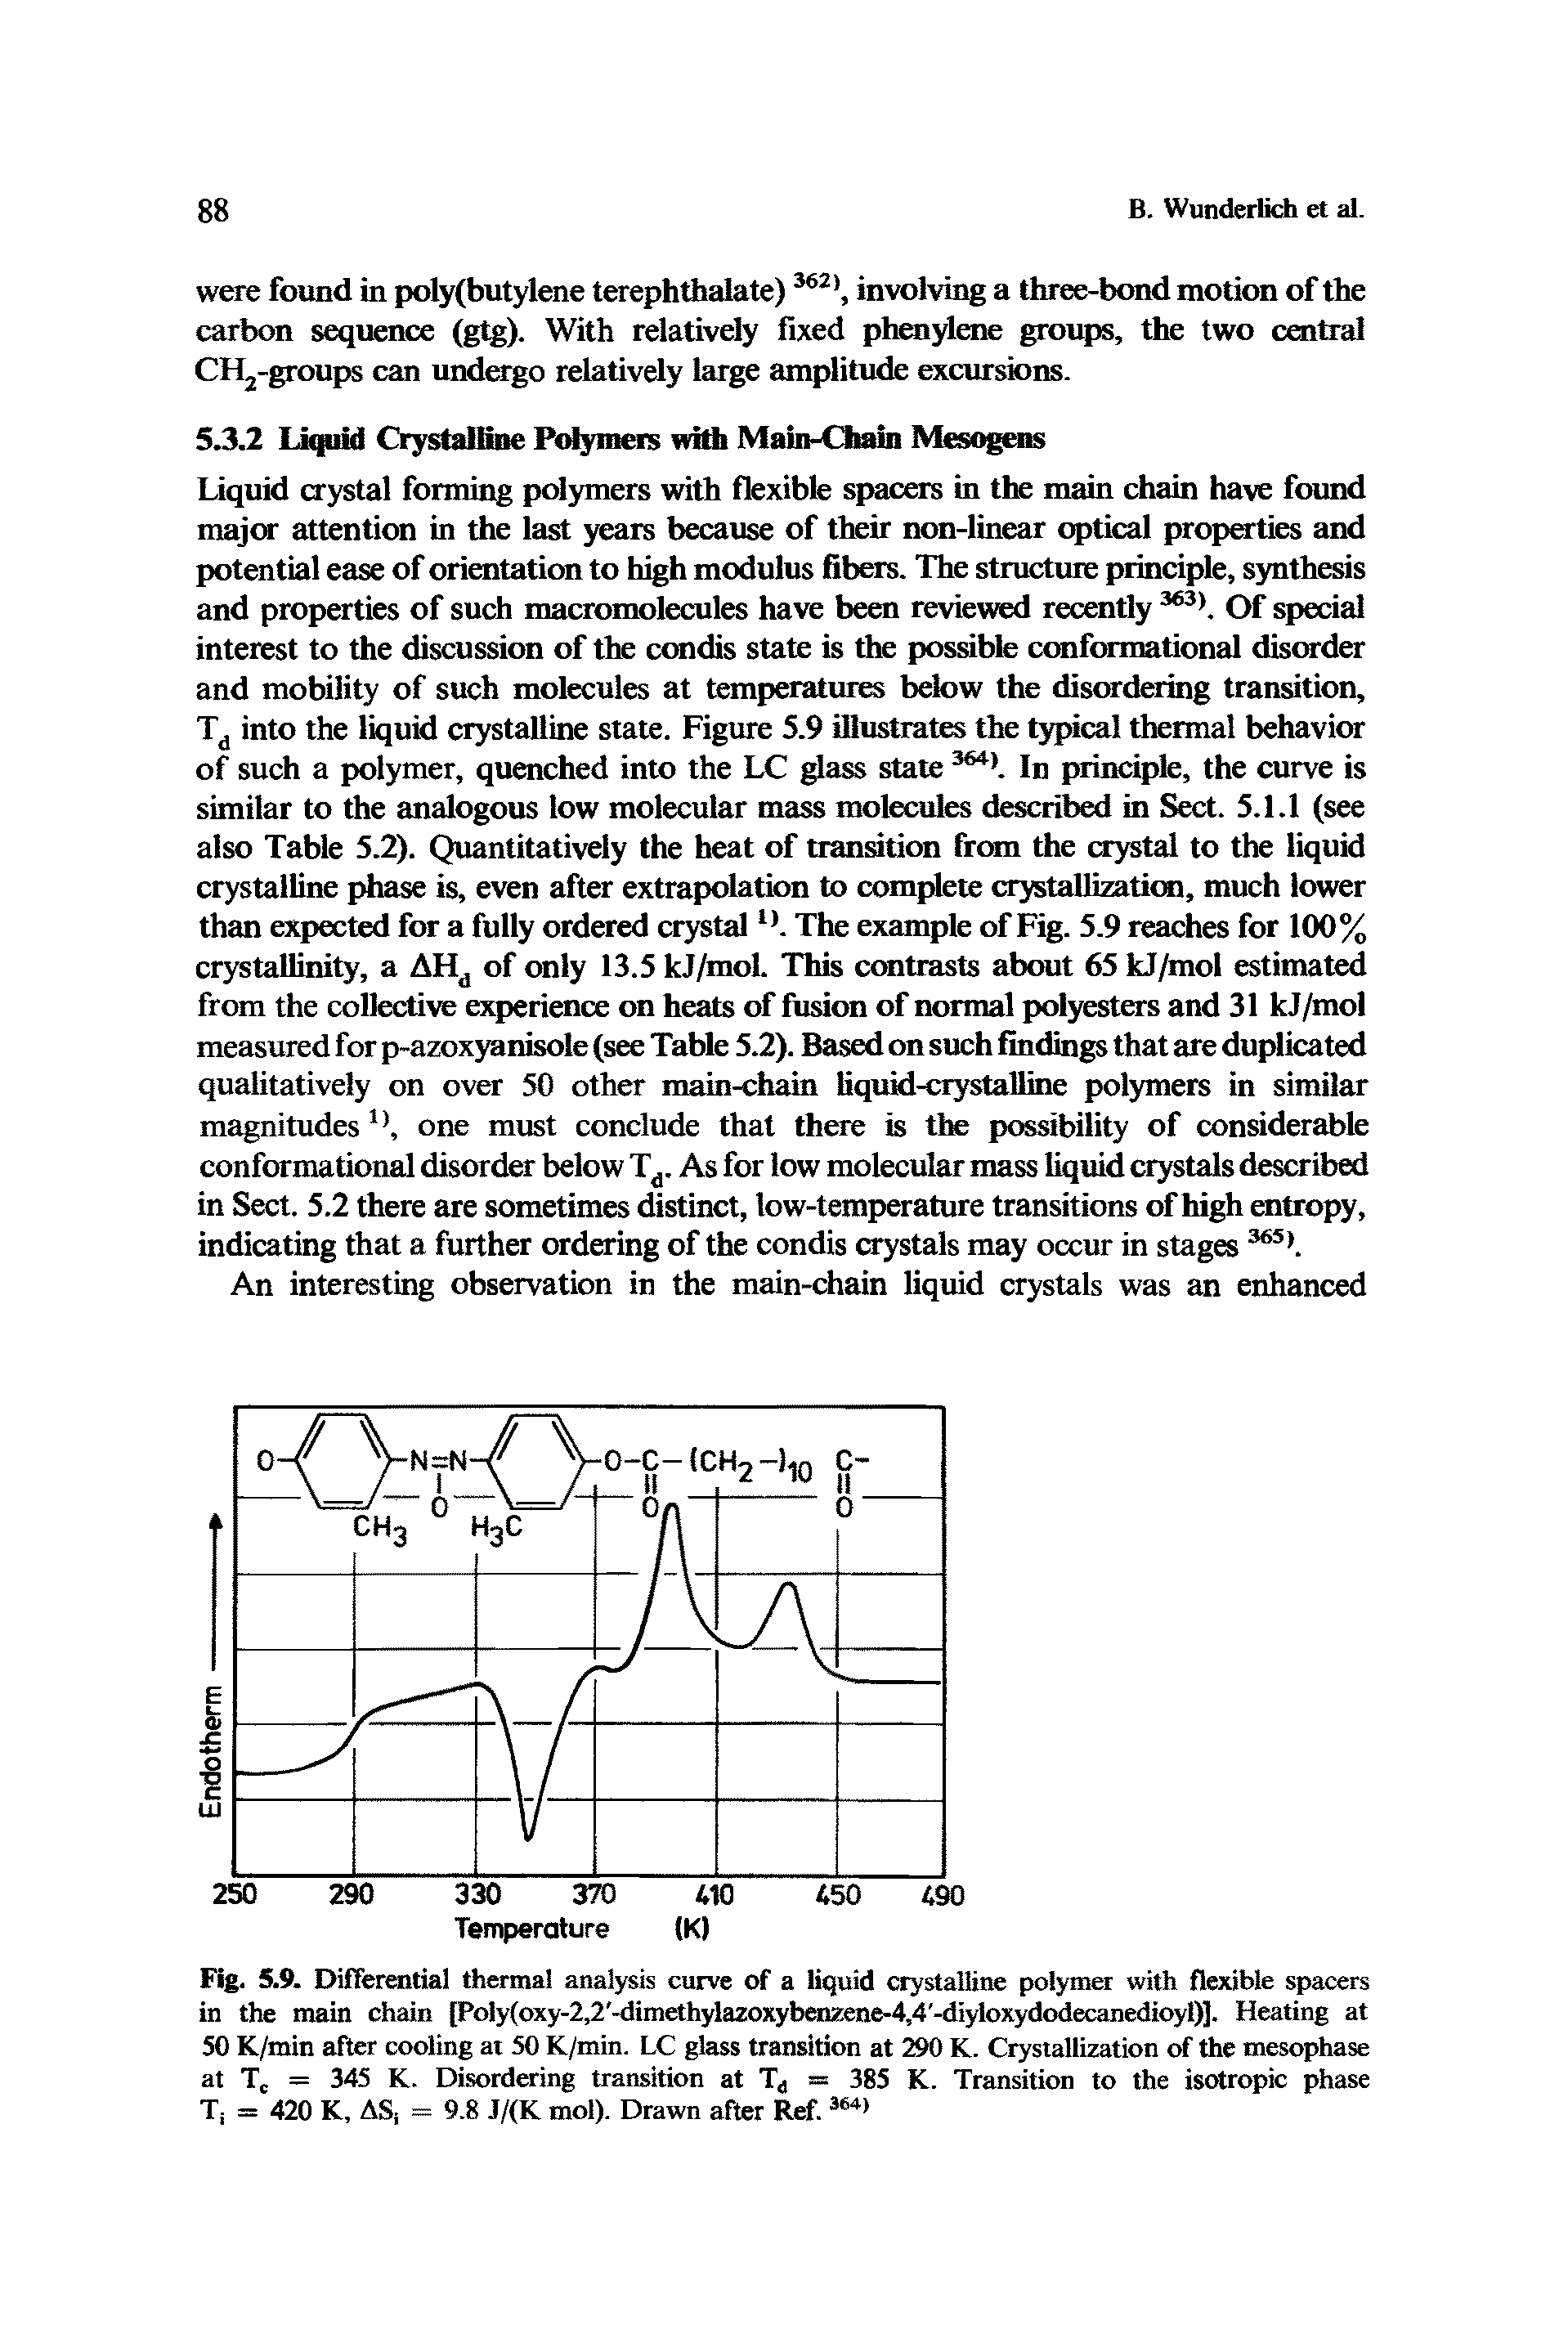 Fig. 5.9. Differential thermal analysis curve of a liquid crystalline polymer with flexible spacers in the main chain IPoiy(oxy-2,2 -dimethylazoxybenzene-4,4 -diyloxydodecanedioyl)]. Heating at 50 K/min after cooling at 50 K/min. LC glass transition at 290 K. Crystallization of the mesophase at T,. = 345 K. Disordering transition at = 385 K. Transition to the isotropic phase Ti = 420 K, ASi = 9.8 J/(K mol). Drawn after Ref.